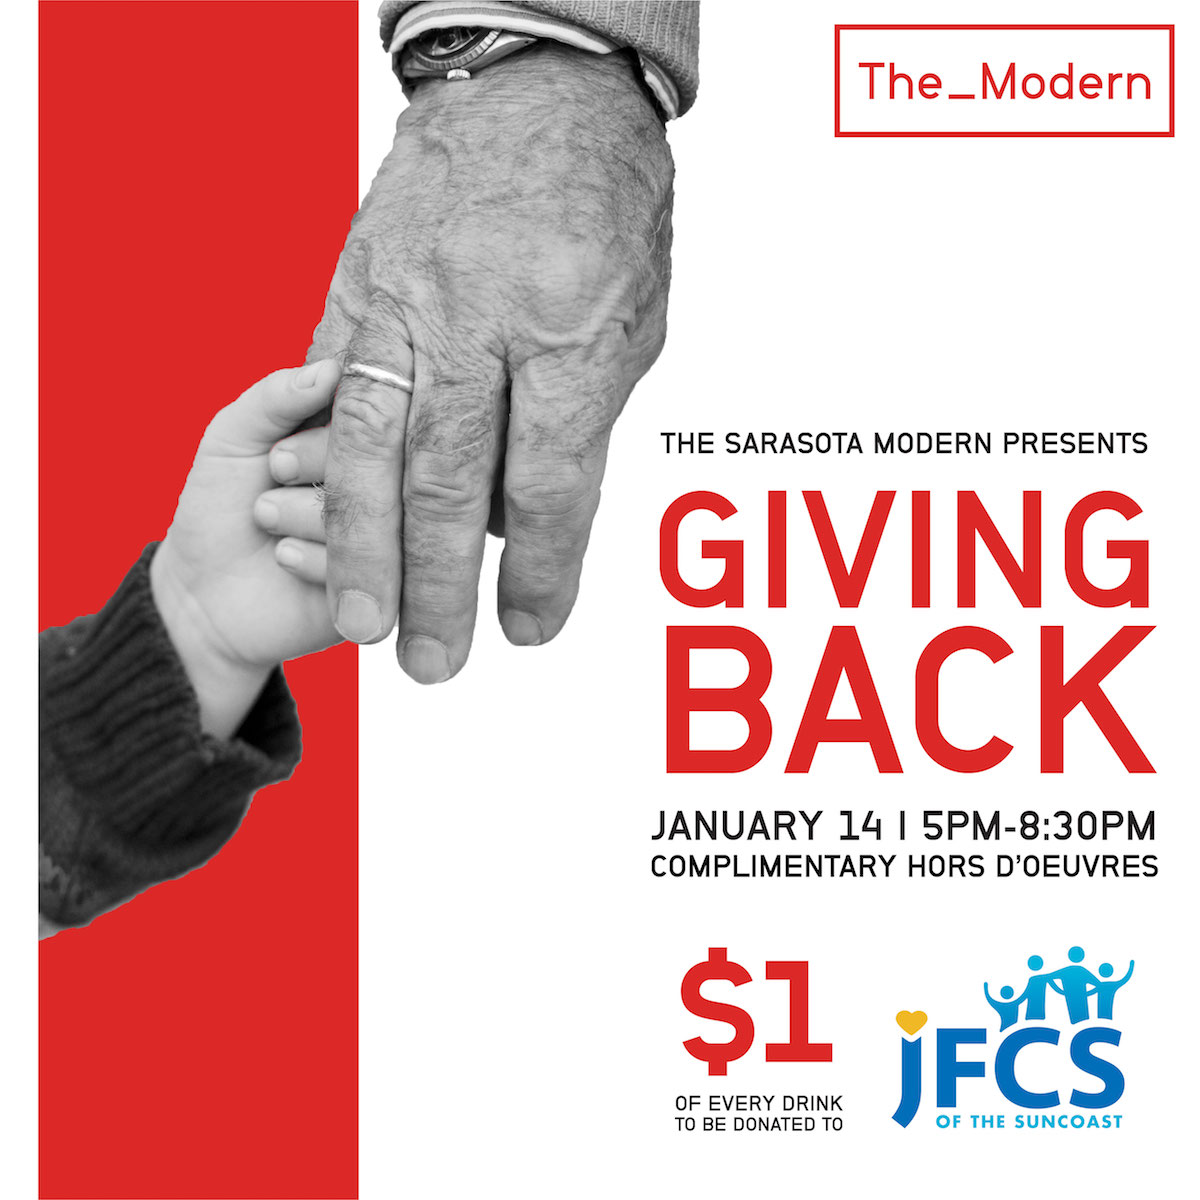 The Sarasota Modern Gives Complimentary Tastings in Benefit of JFCS